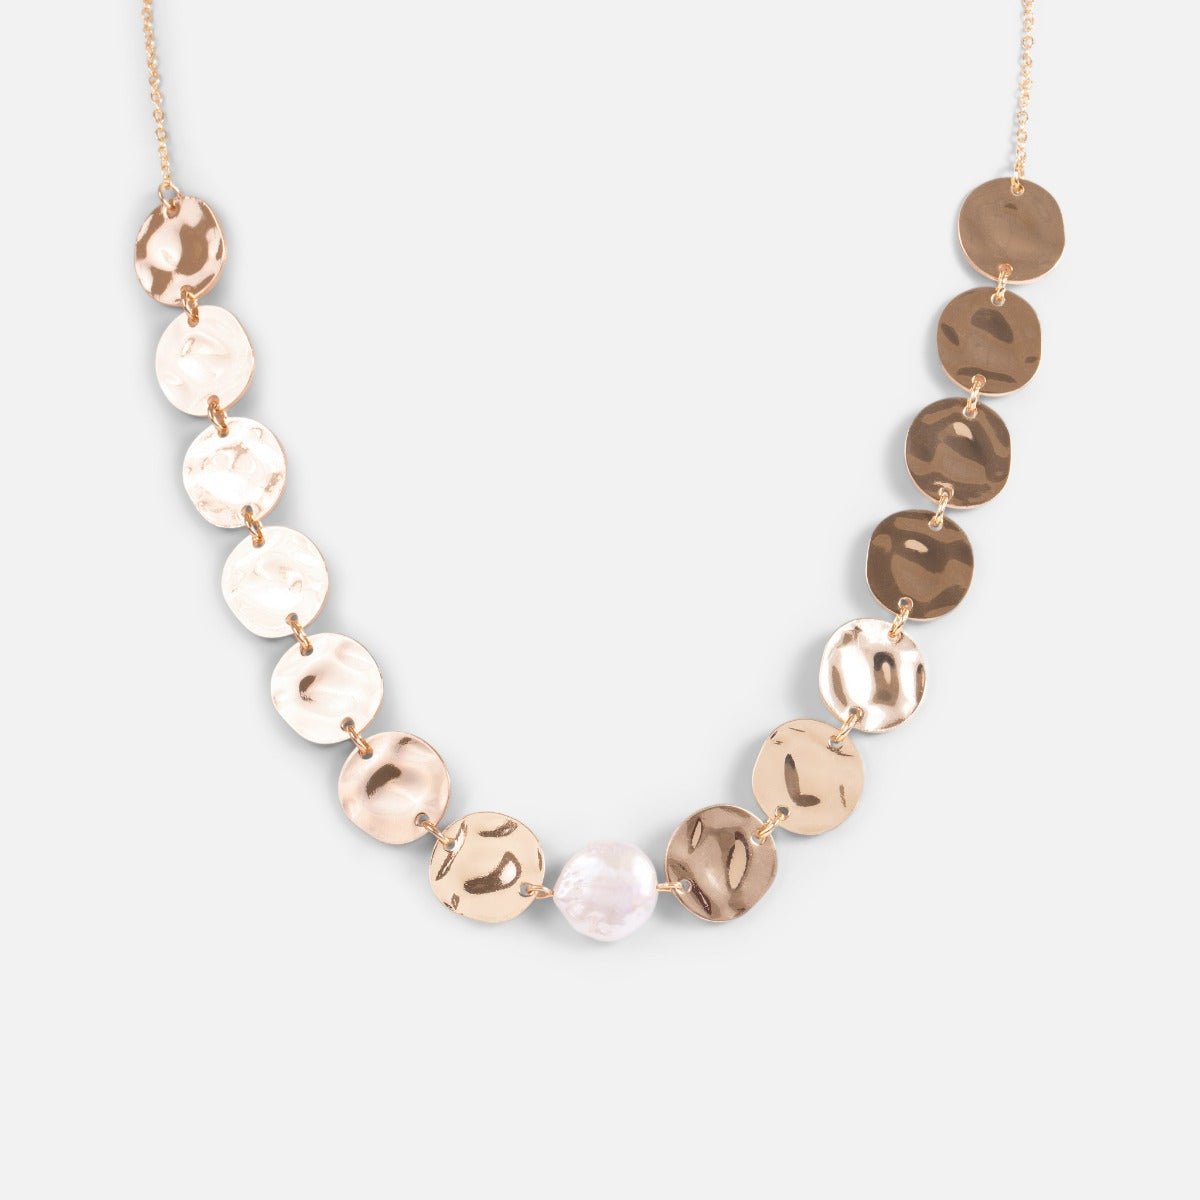 Golden necklace with round hammered disc and pearl